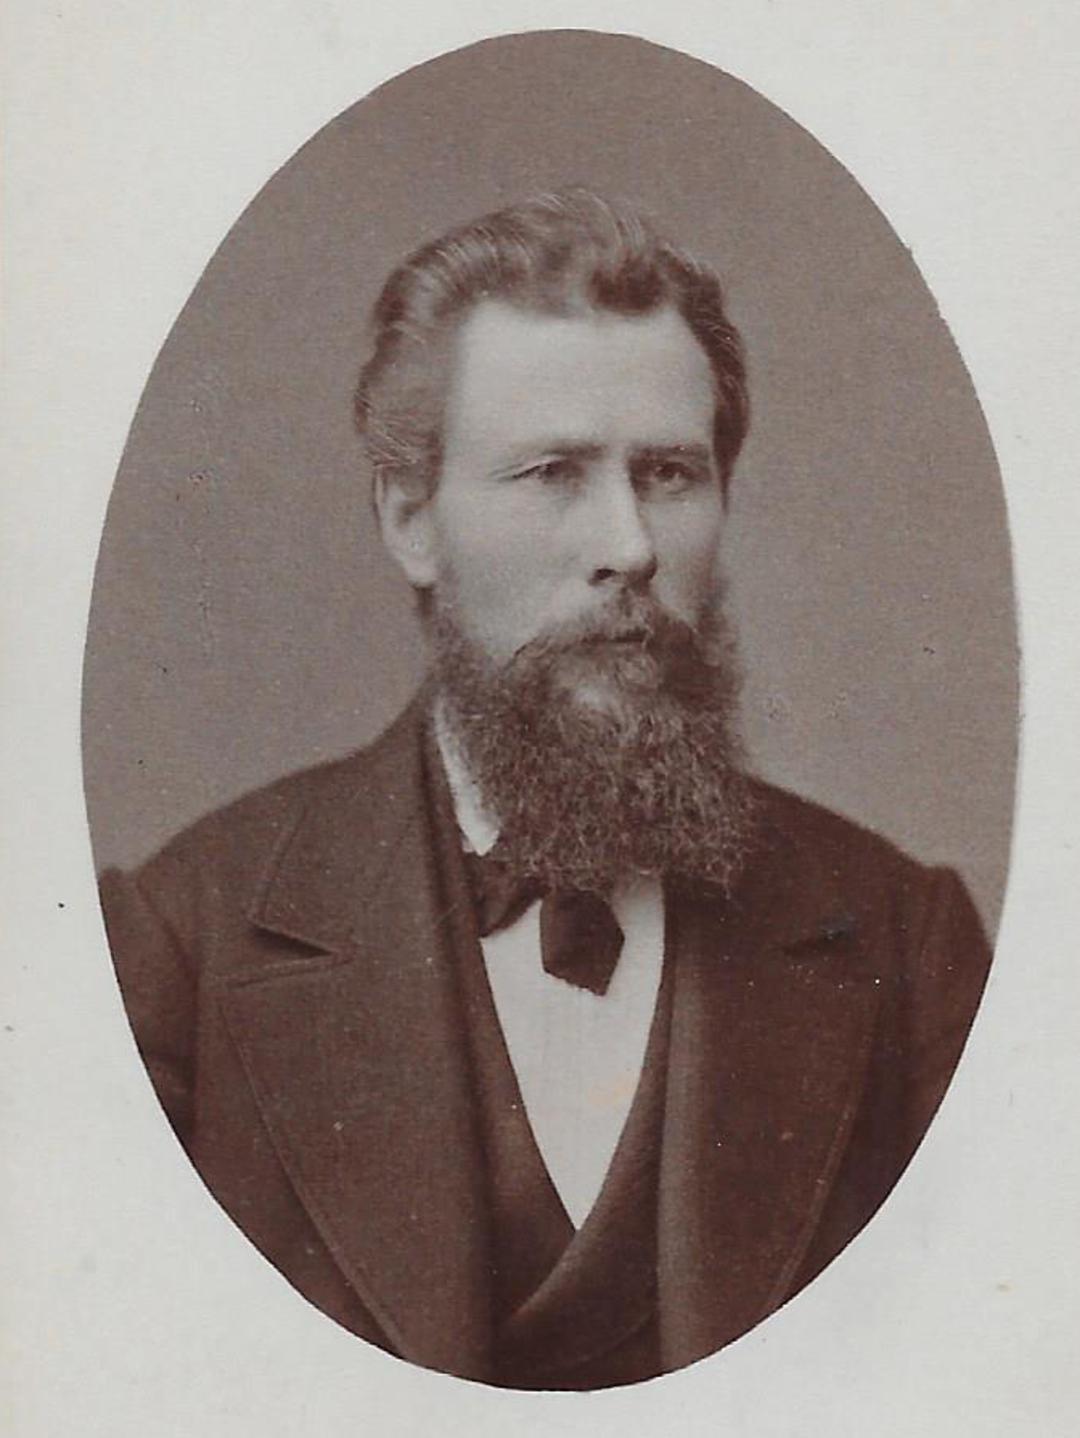 Andrew Christian Nielson (1840 - 1924) Profile